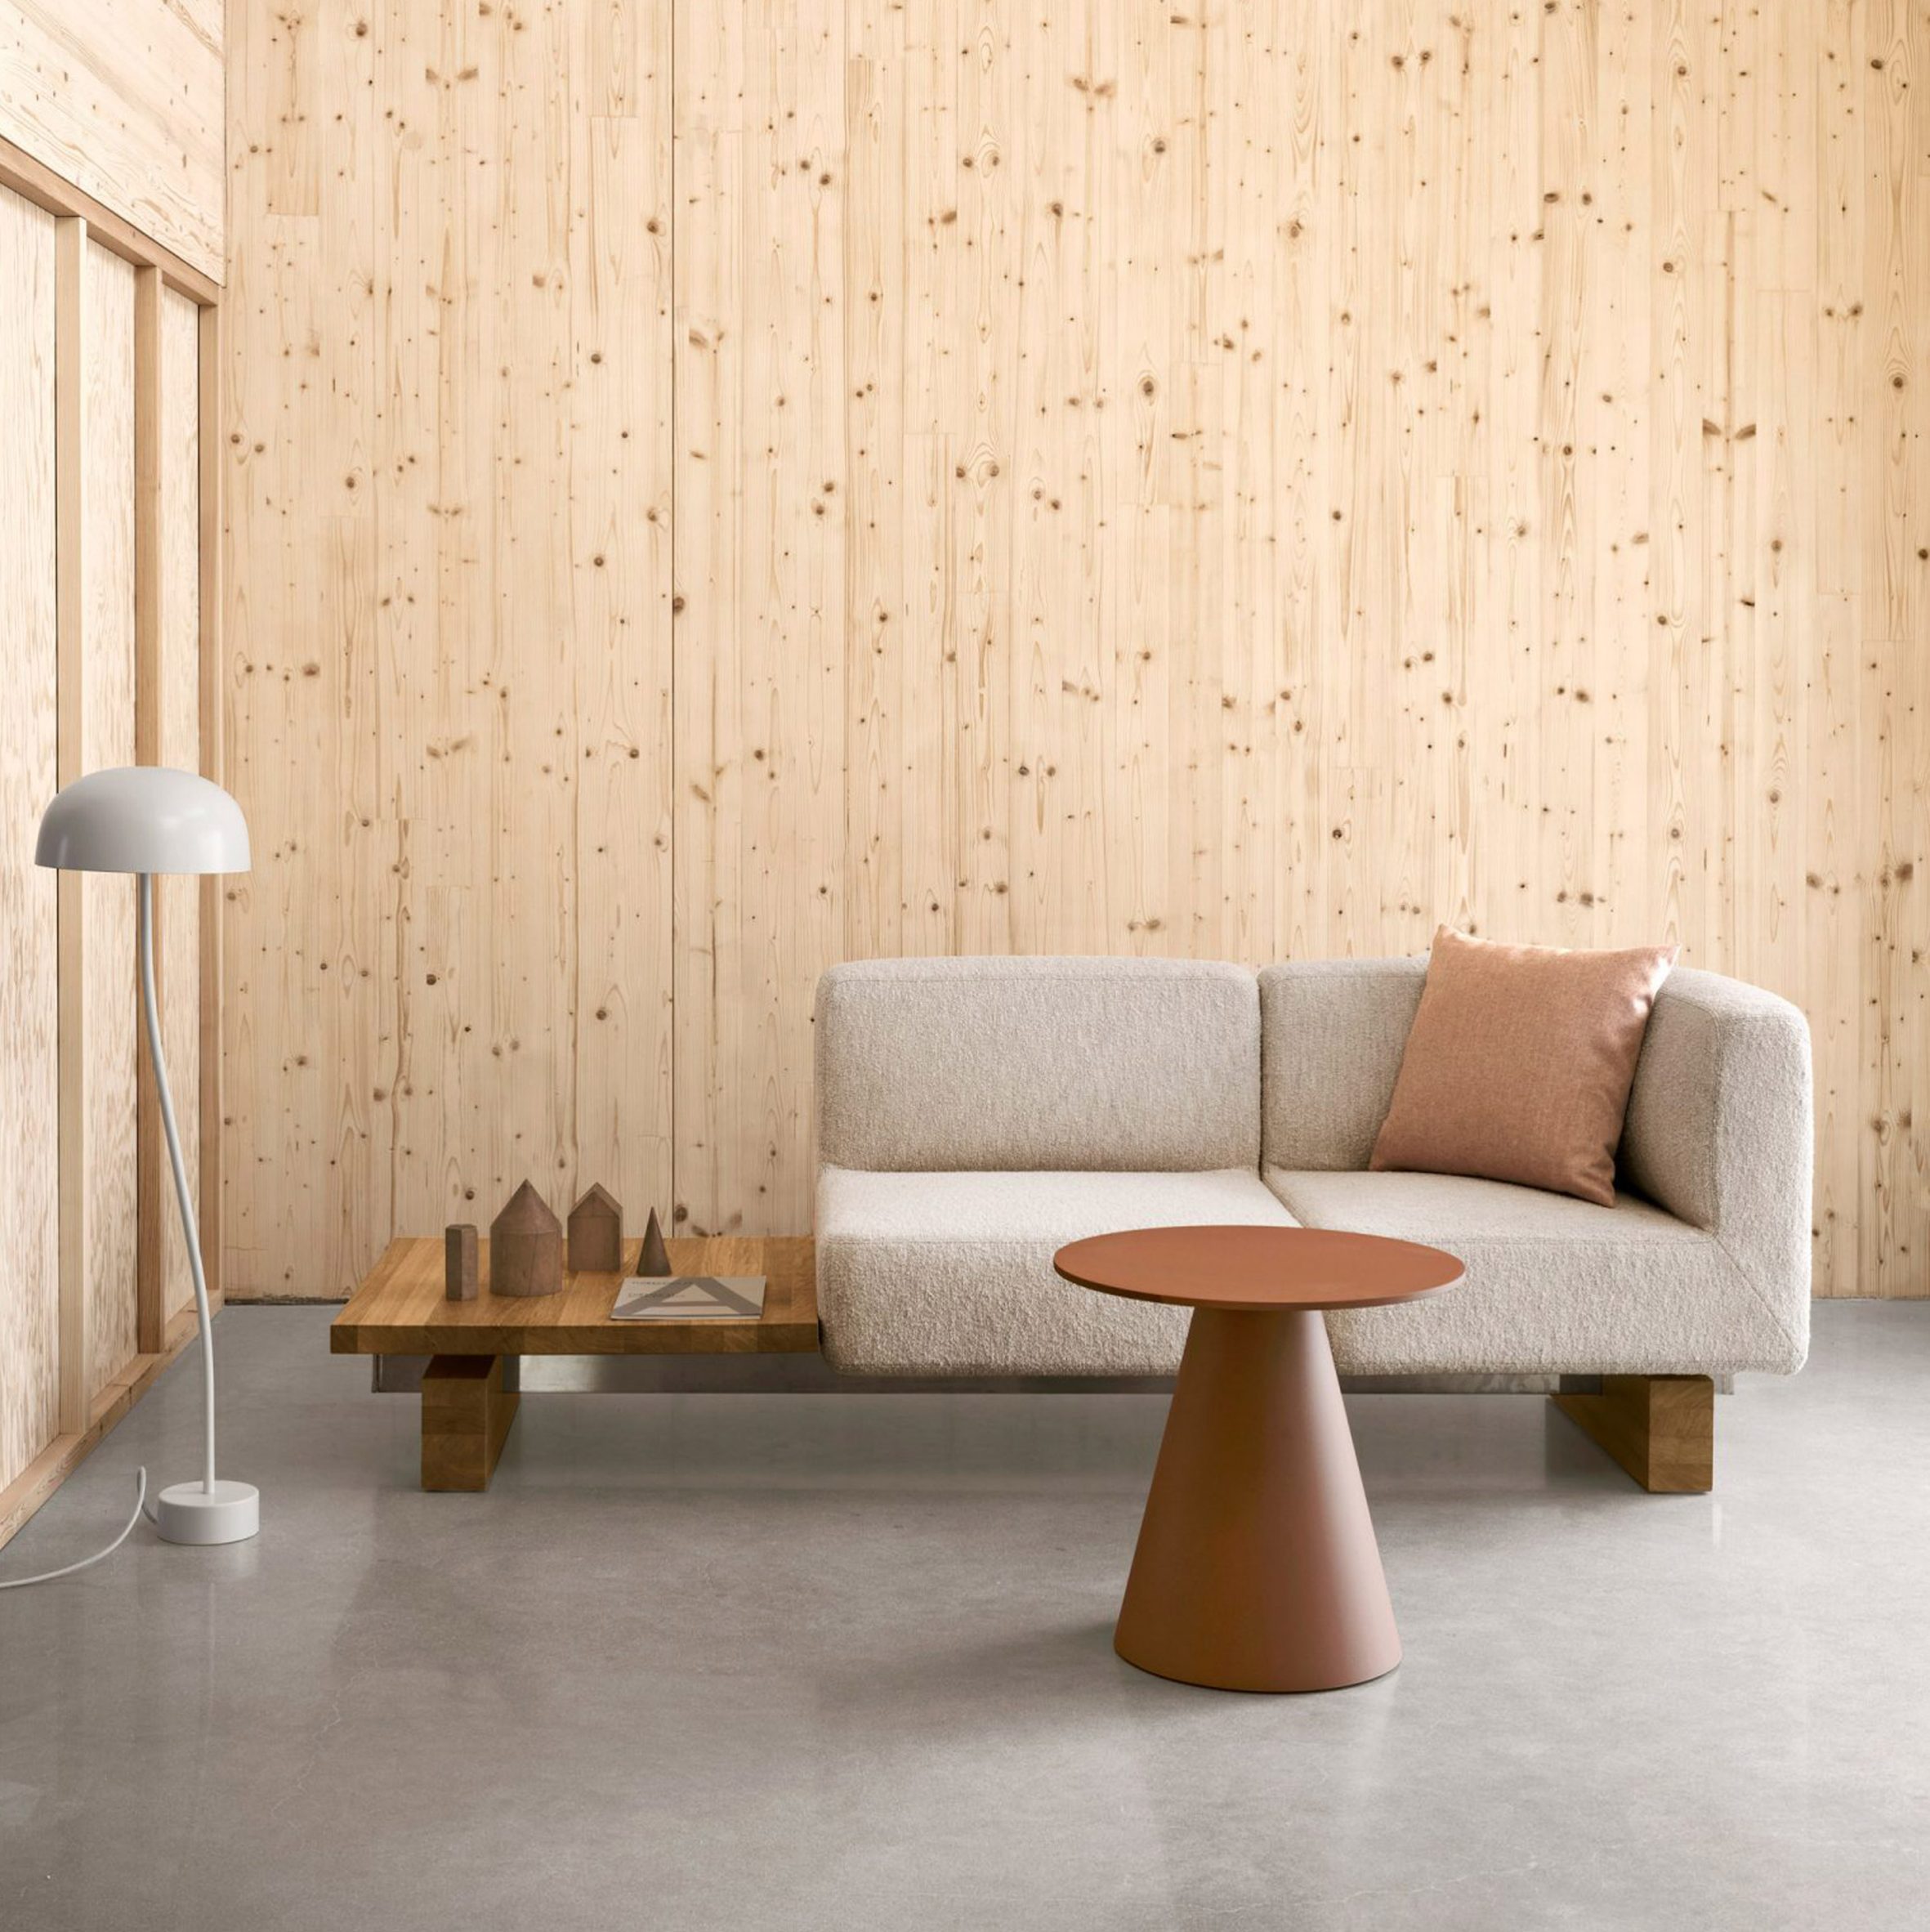 RUT modular seating with table element in a timber living room interior